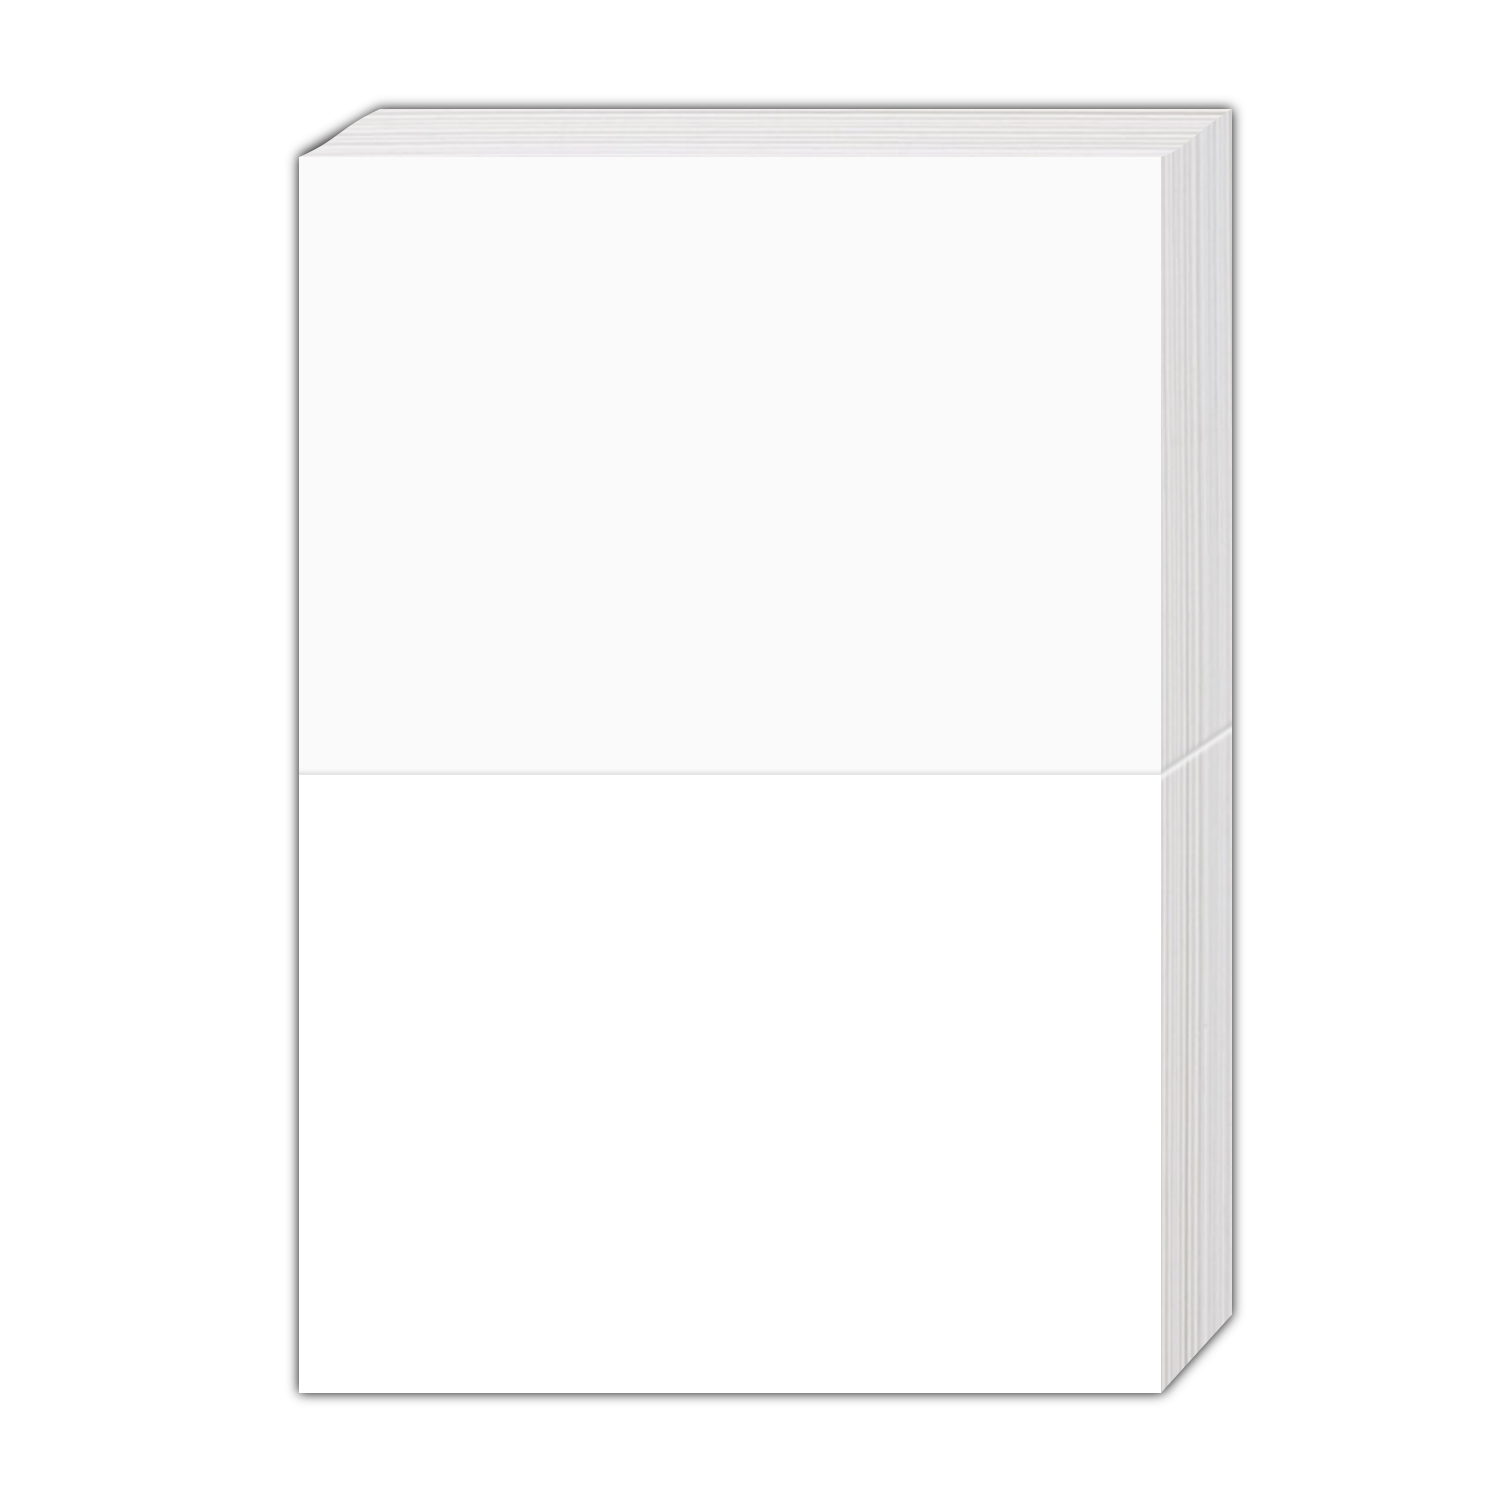 Bulk Blank White or Natural 5x7 inch Discount Card Stock